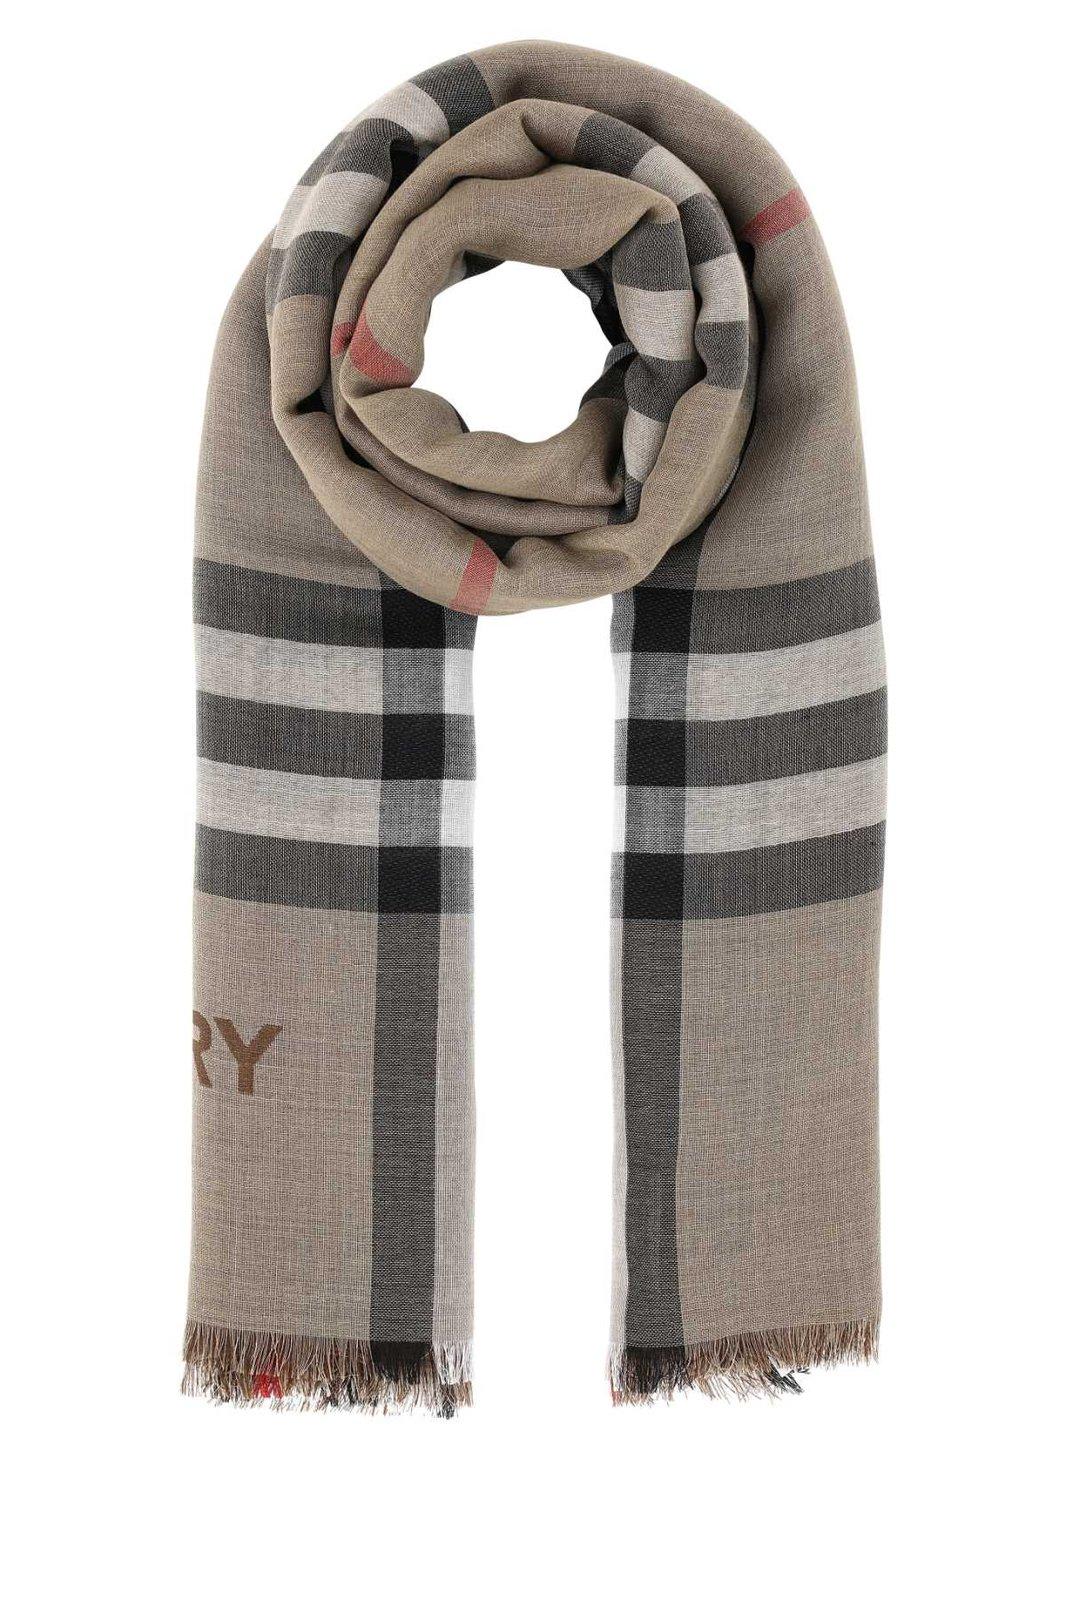 Burberry Frayed Edge Checked Scarf In Beige